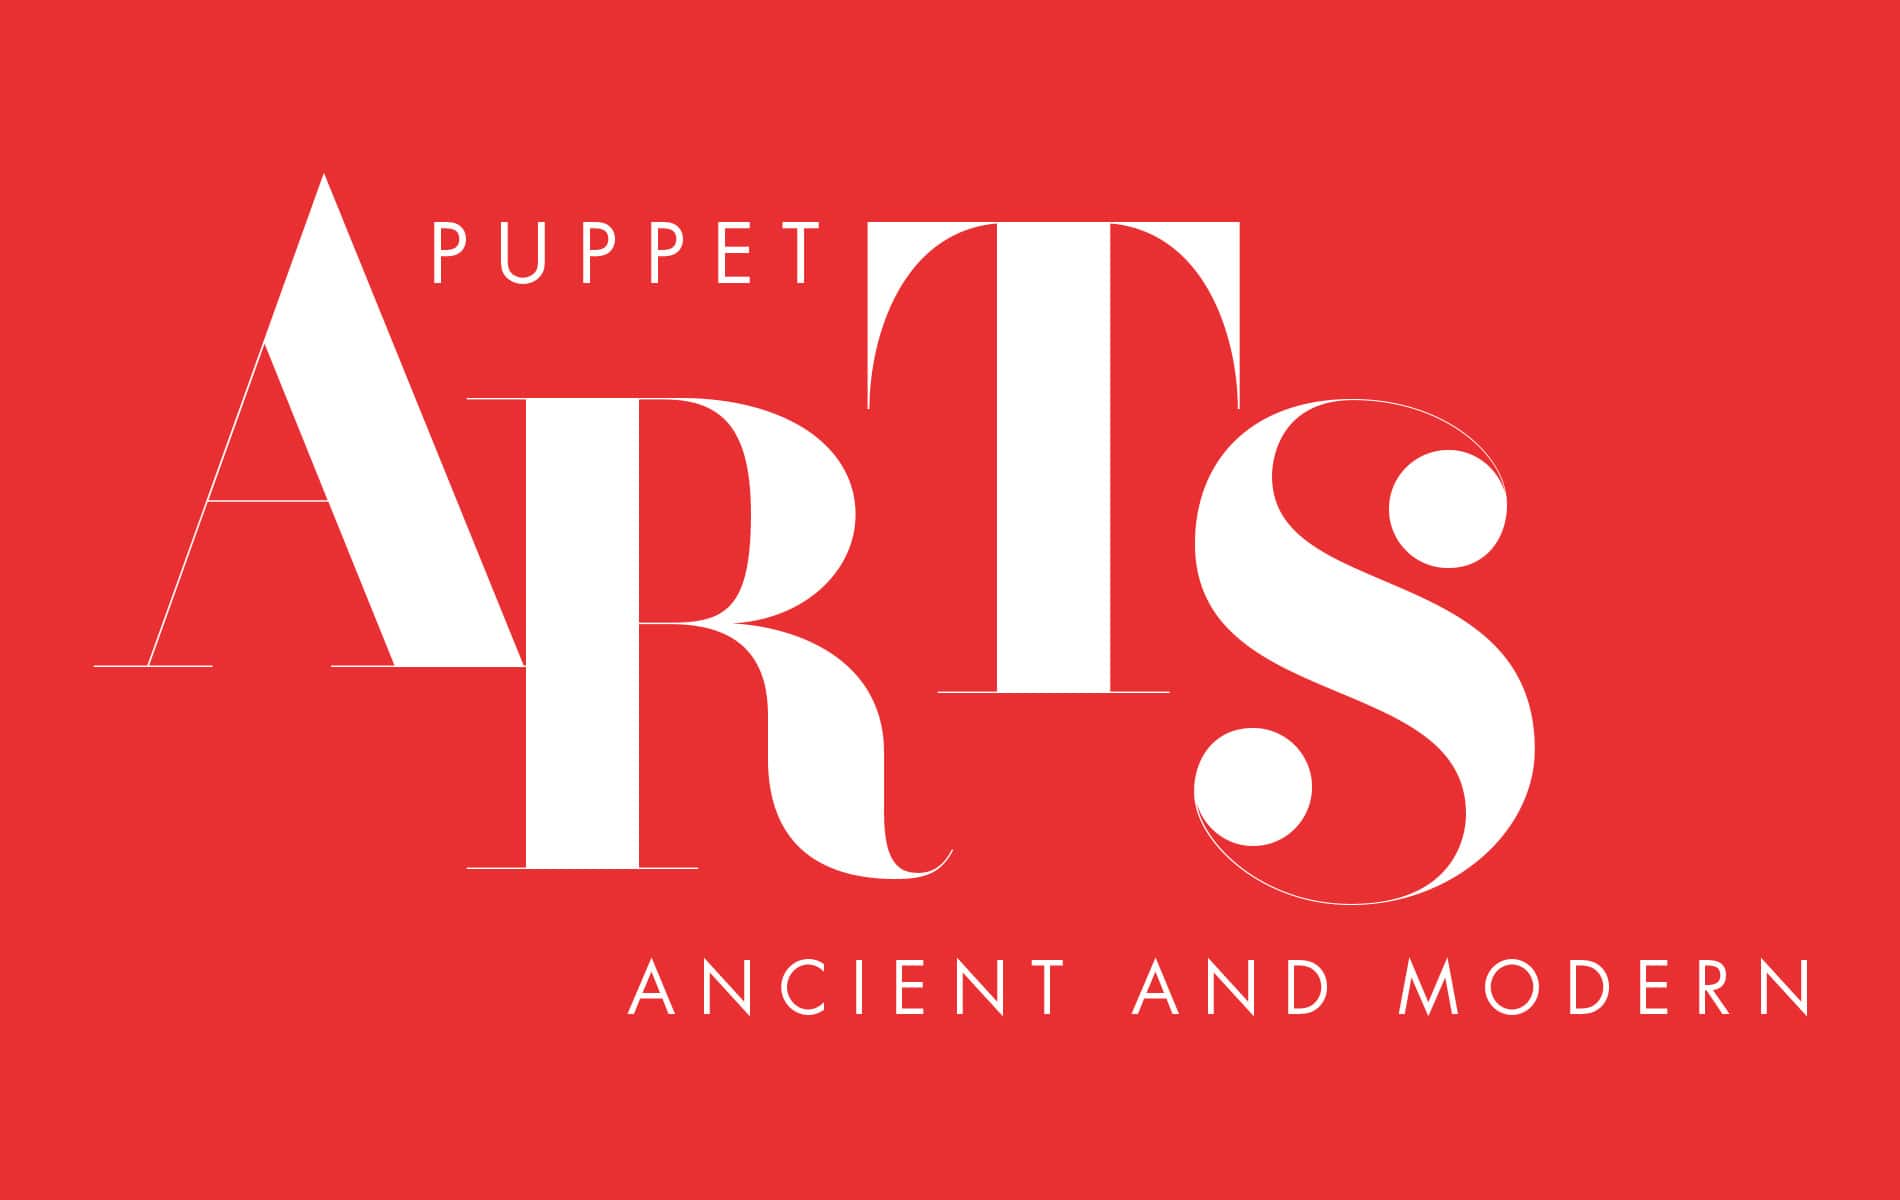 Puppet Arts: Ancient and Modern